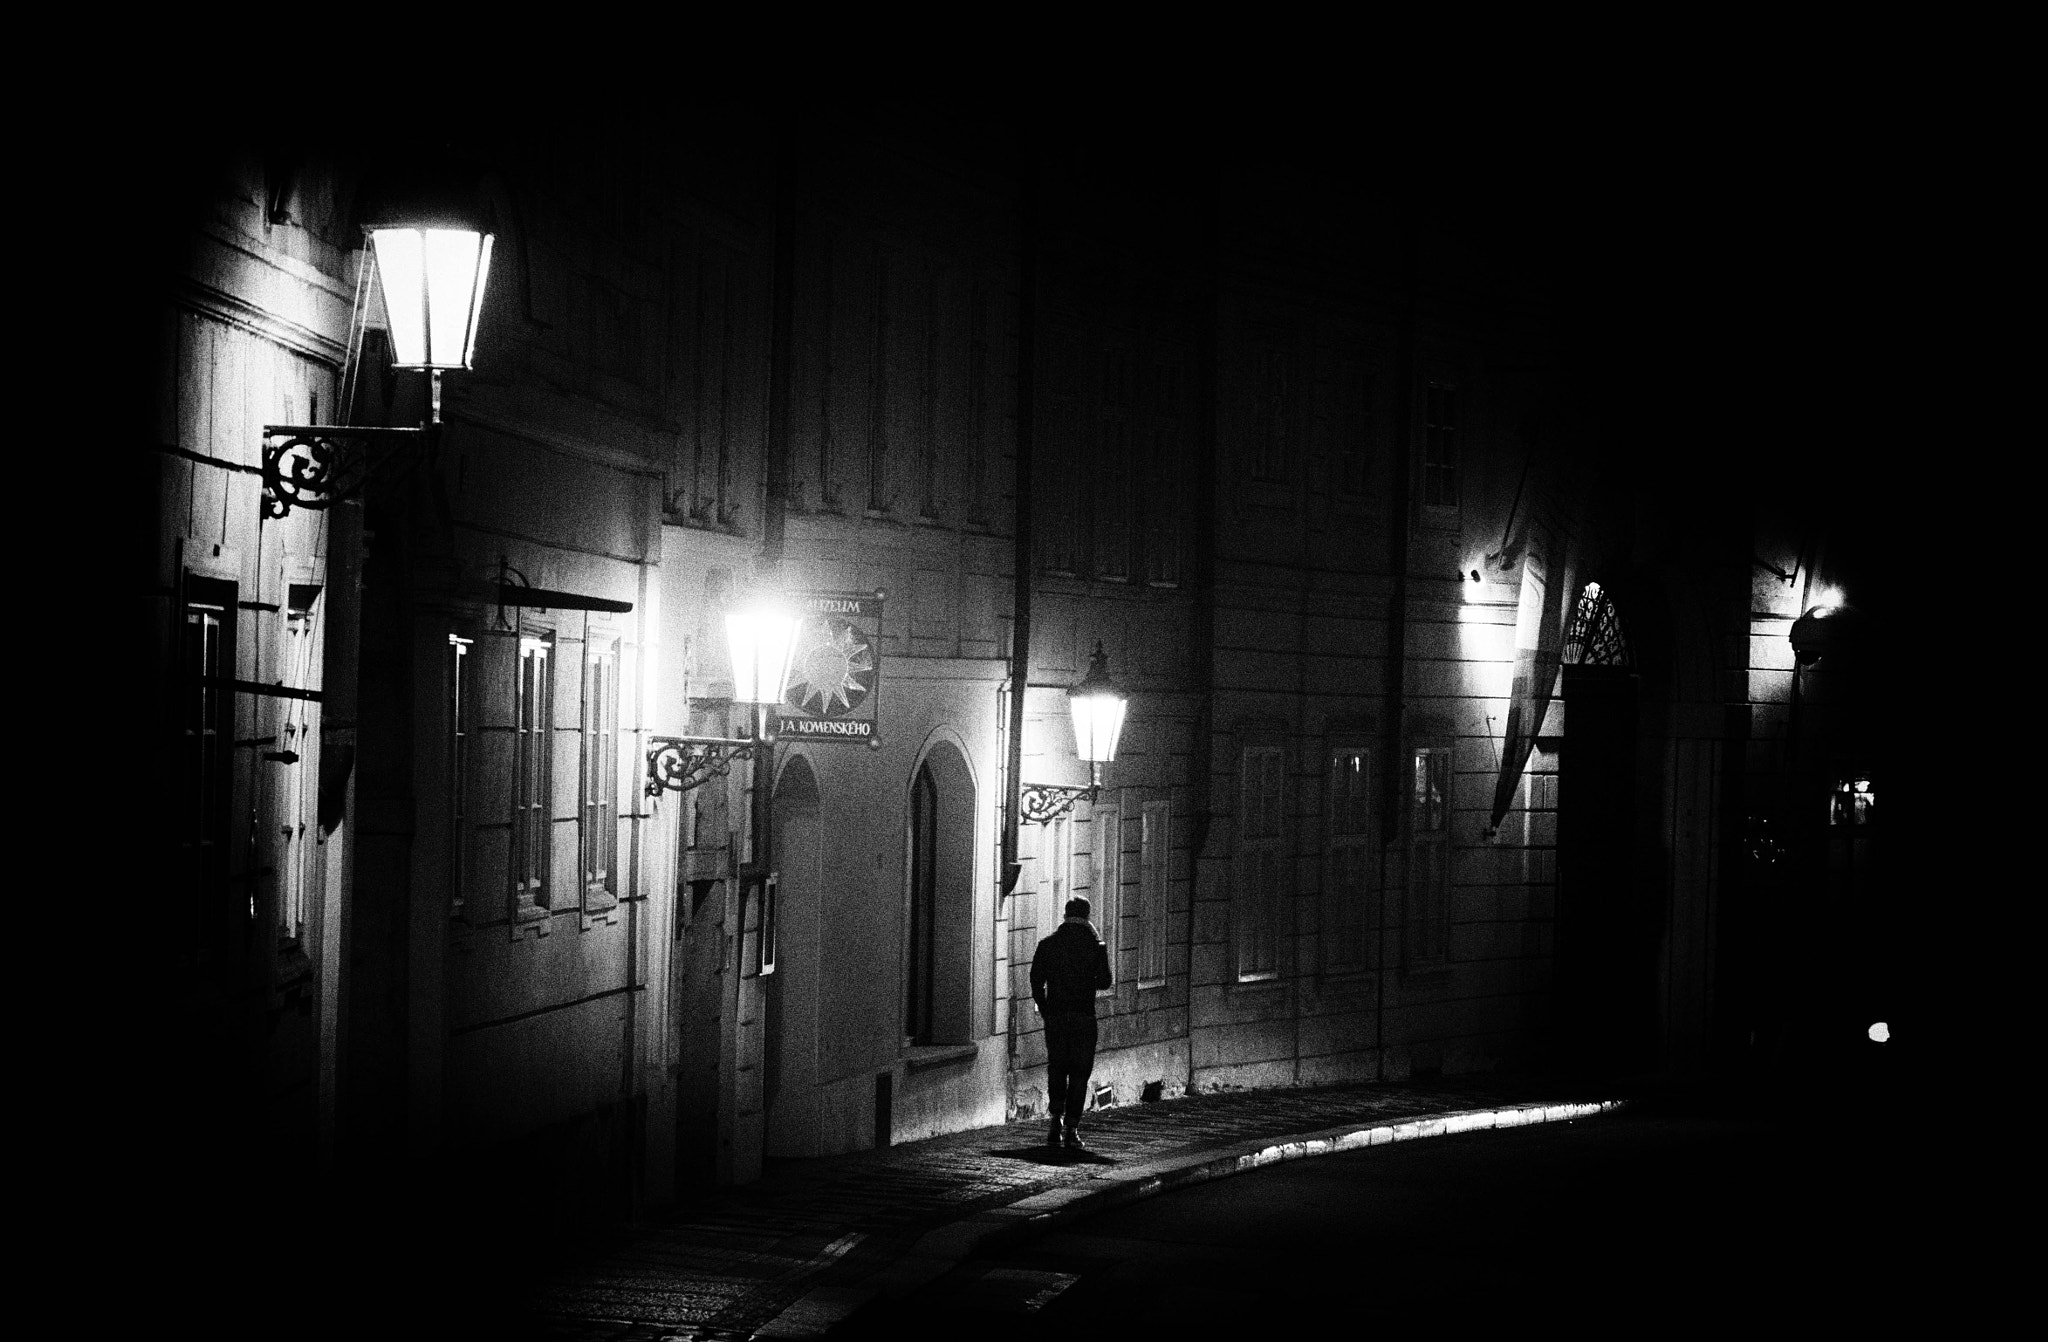 a person standing on a street at night.